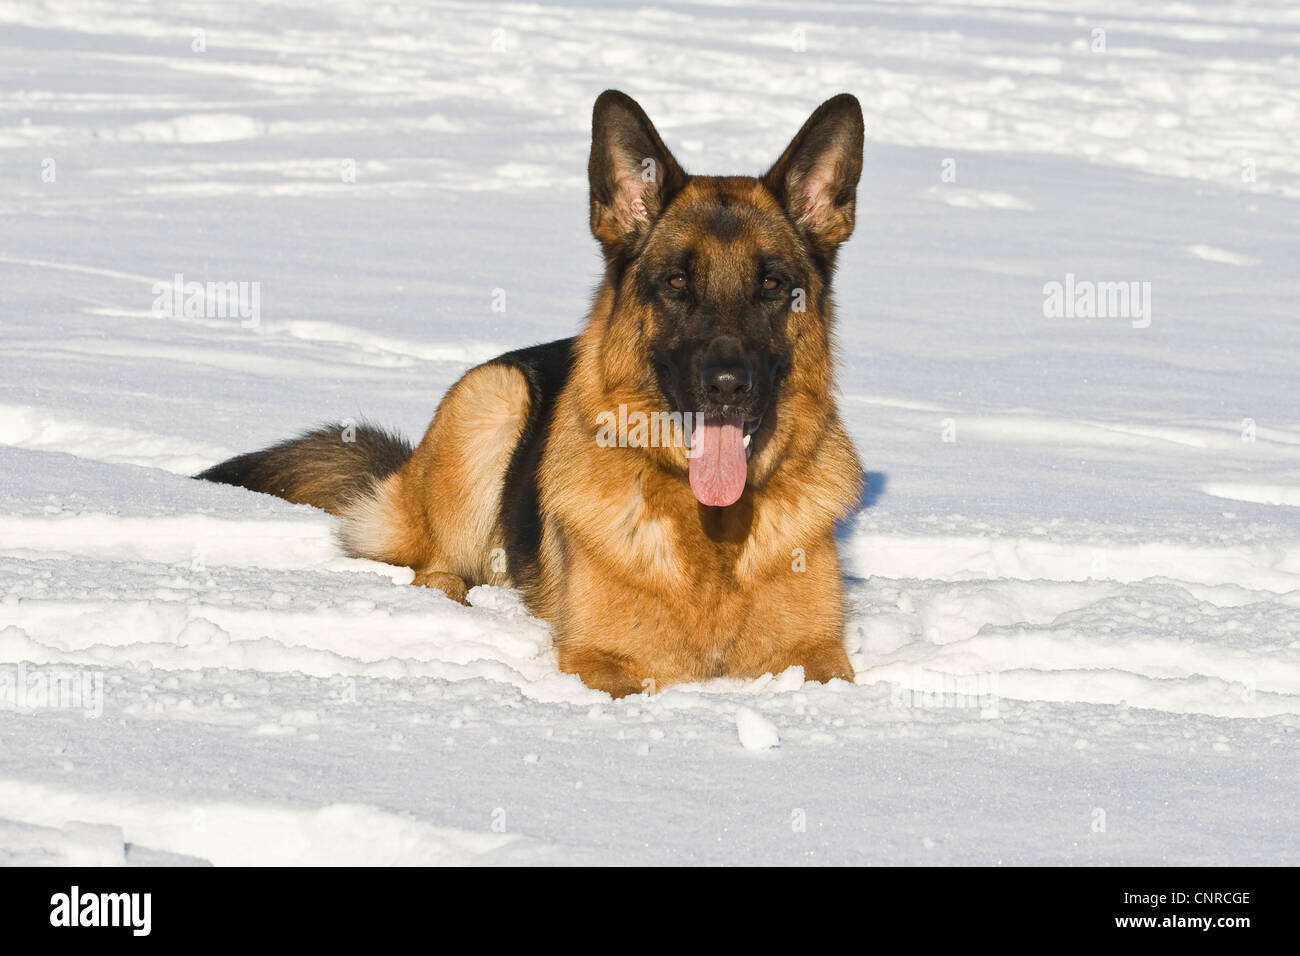 German Shepherd Dog (Canis lupus f. familiaris), 2-year-old she-dog lying in the snow Stock Photo